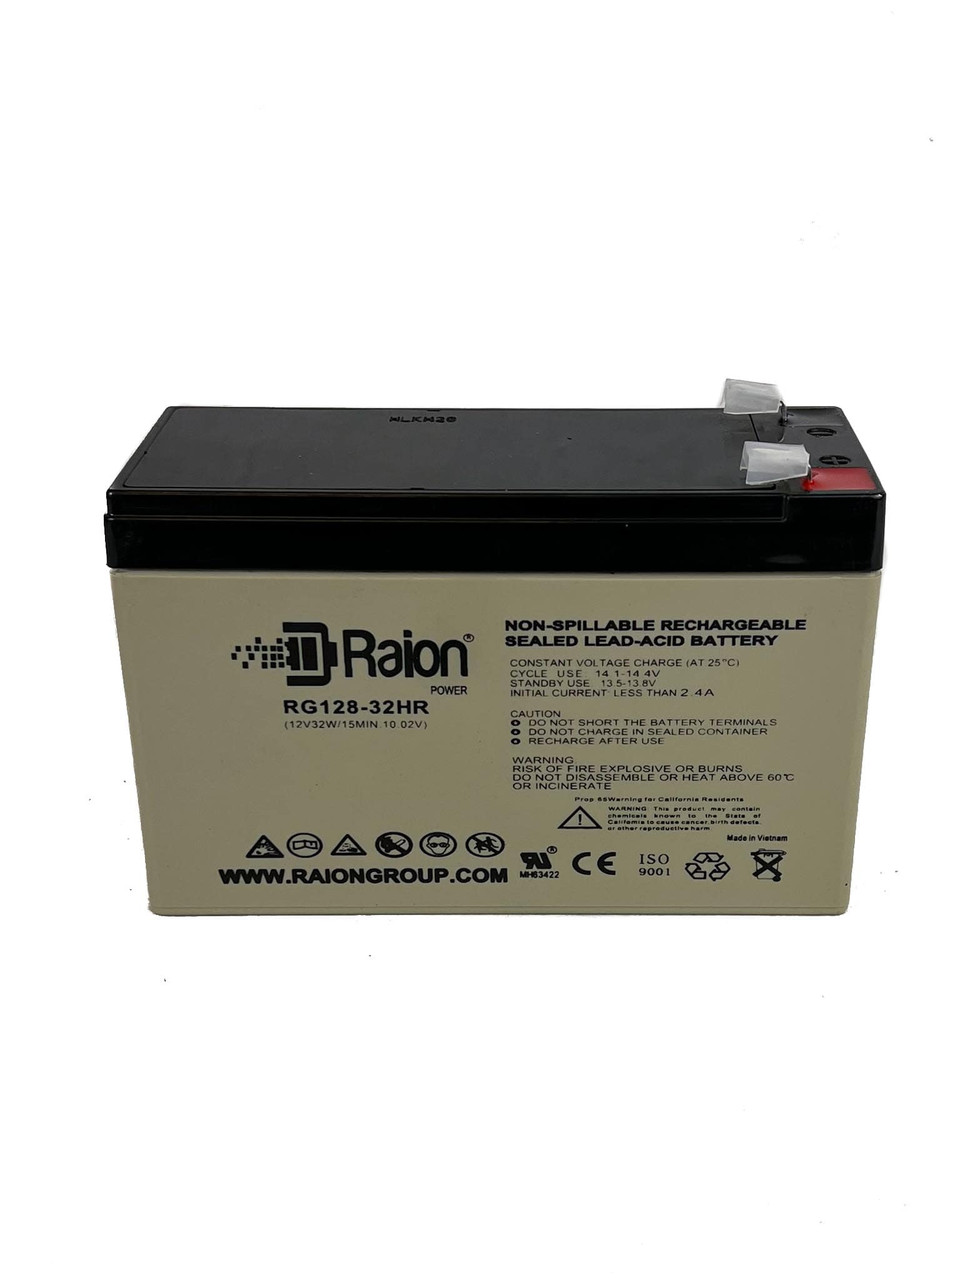 Raion Power RG128-32HR Replacement High Rate Battery Cartridge for APC BACK-UPS ES BK500